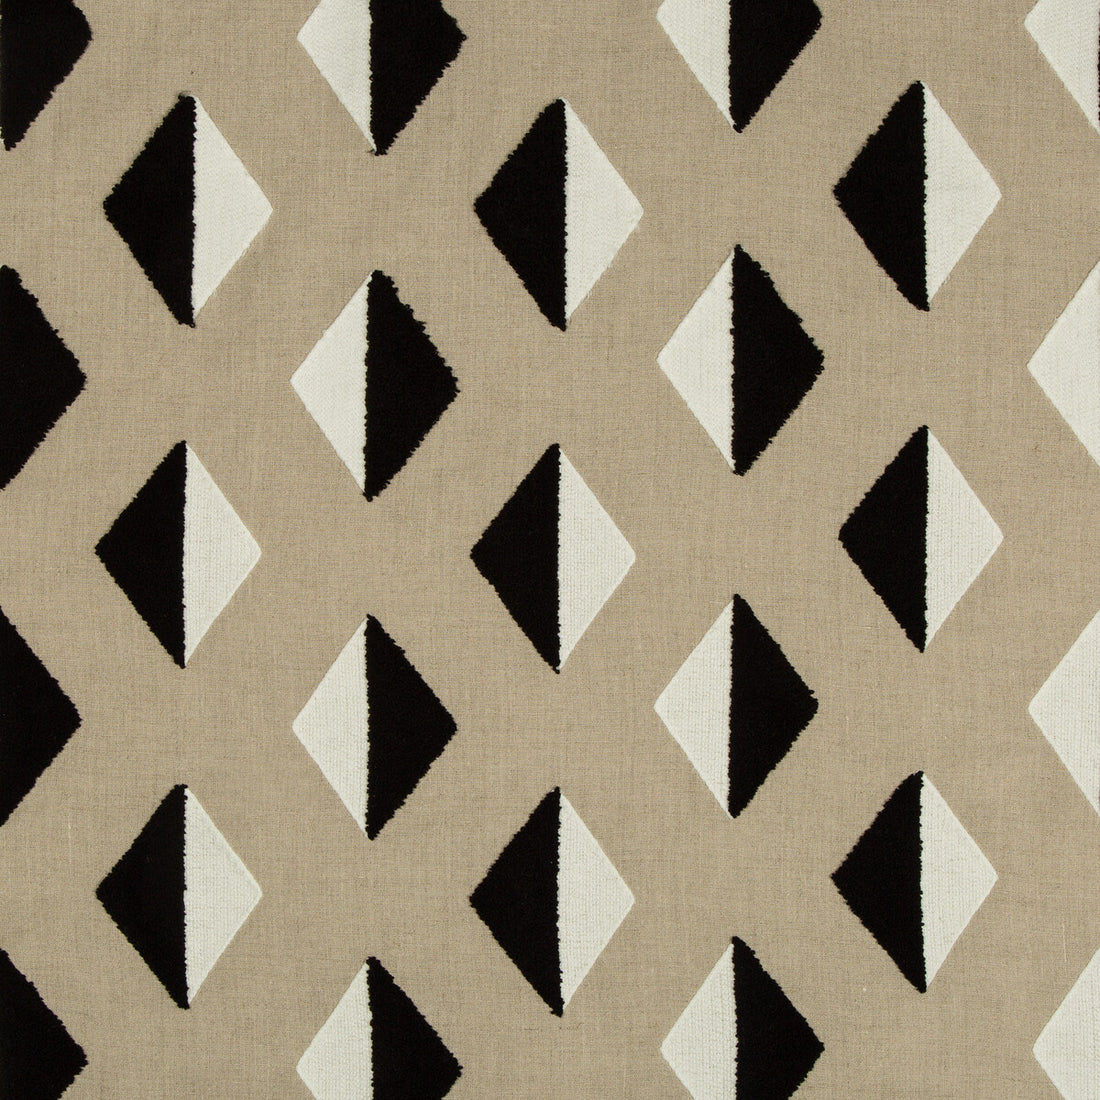 Barroco Boucle fabric in dalmatian color - pattern 35389.816.0 - by Kravet Design in the Nate Berkus Well-Traveled collection